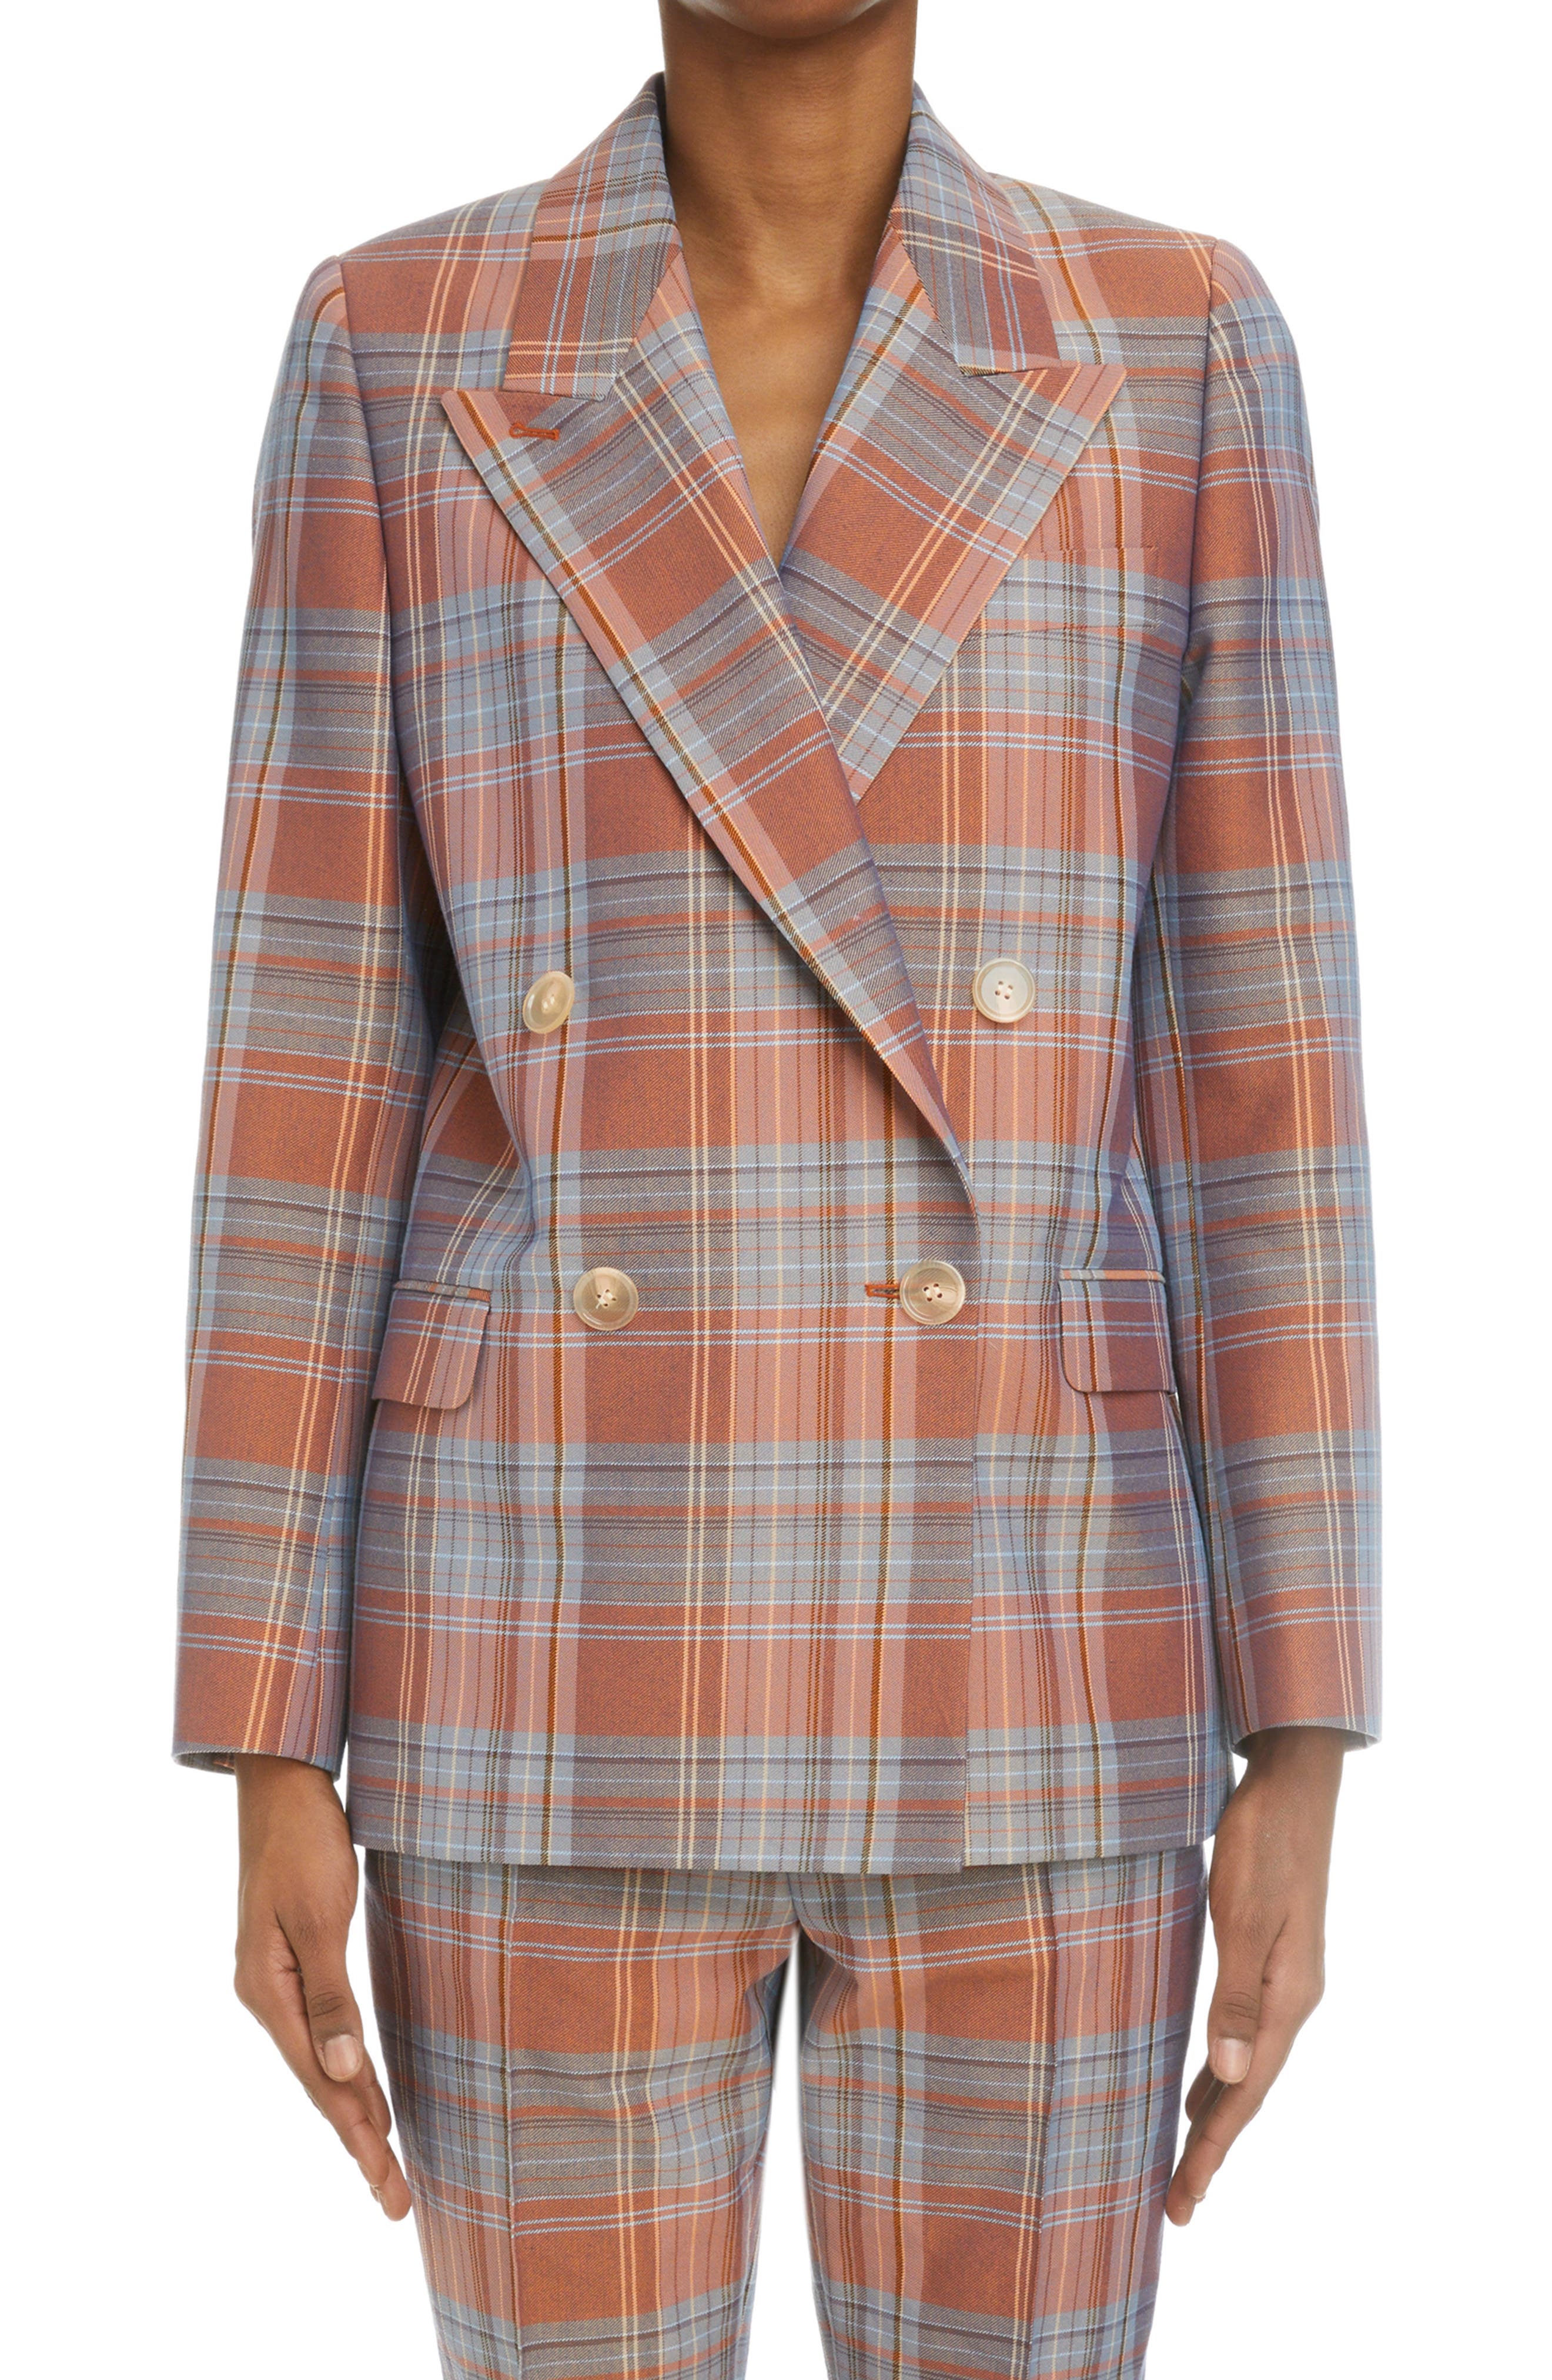 Acne Studios Janny Plaid Double Breasted Suit Jacket in Burgundy/Aqua at Nordstrom, Size 2 Us